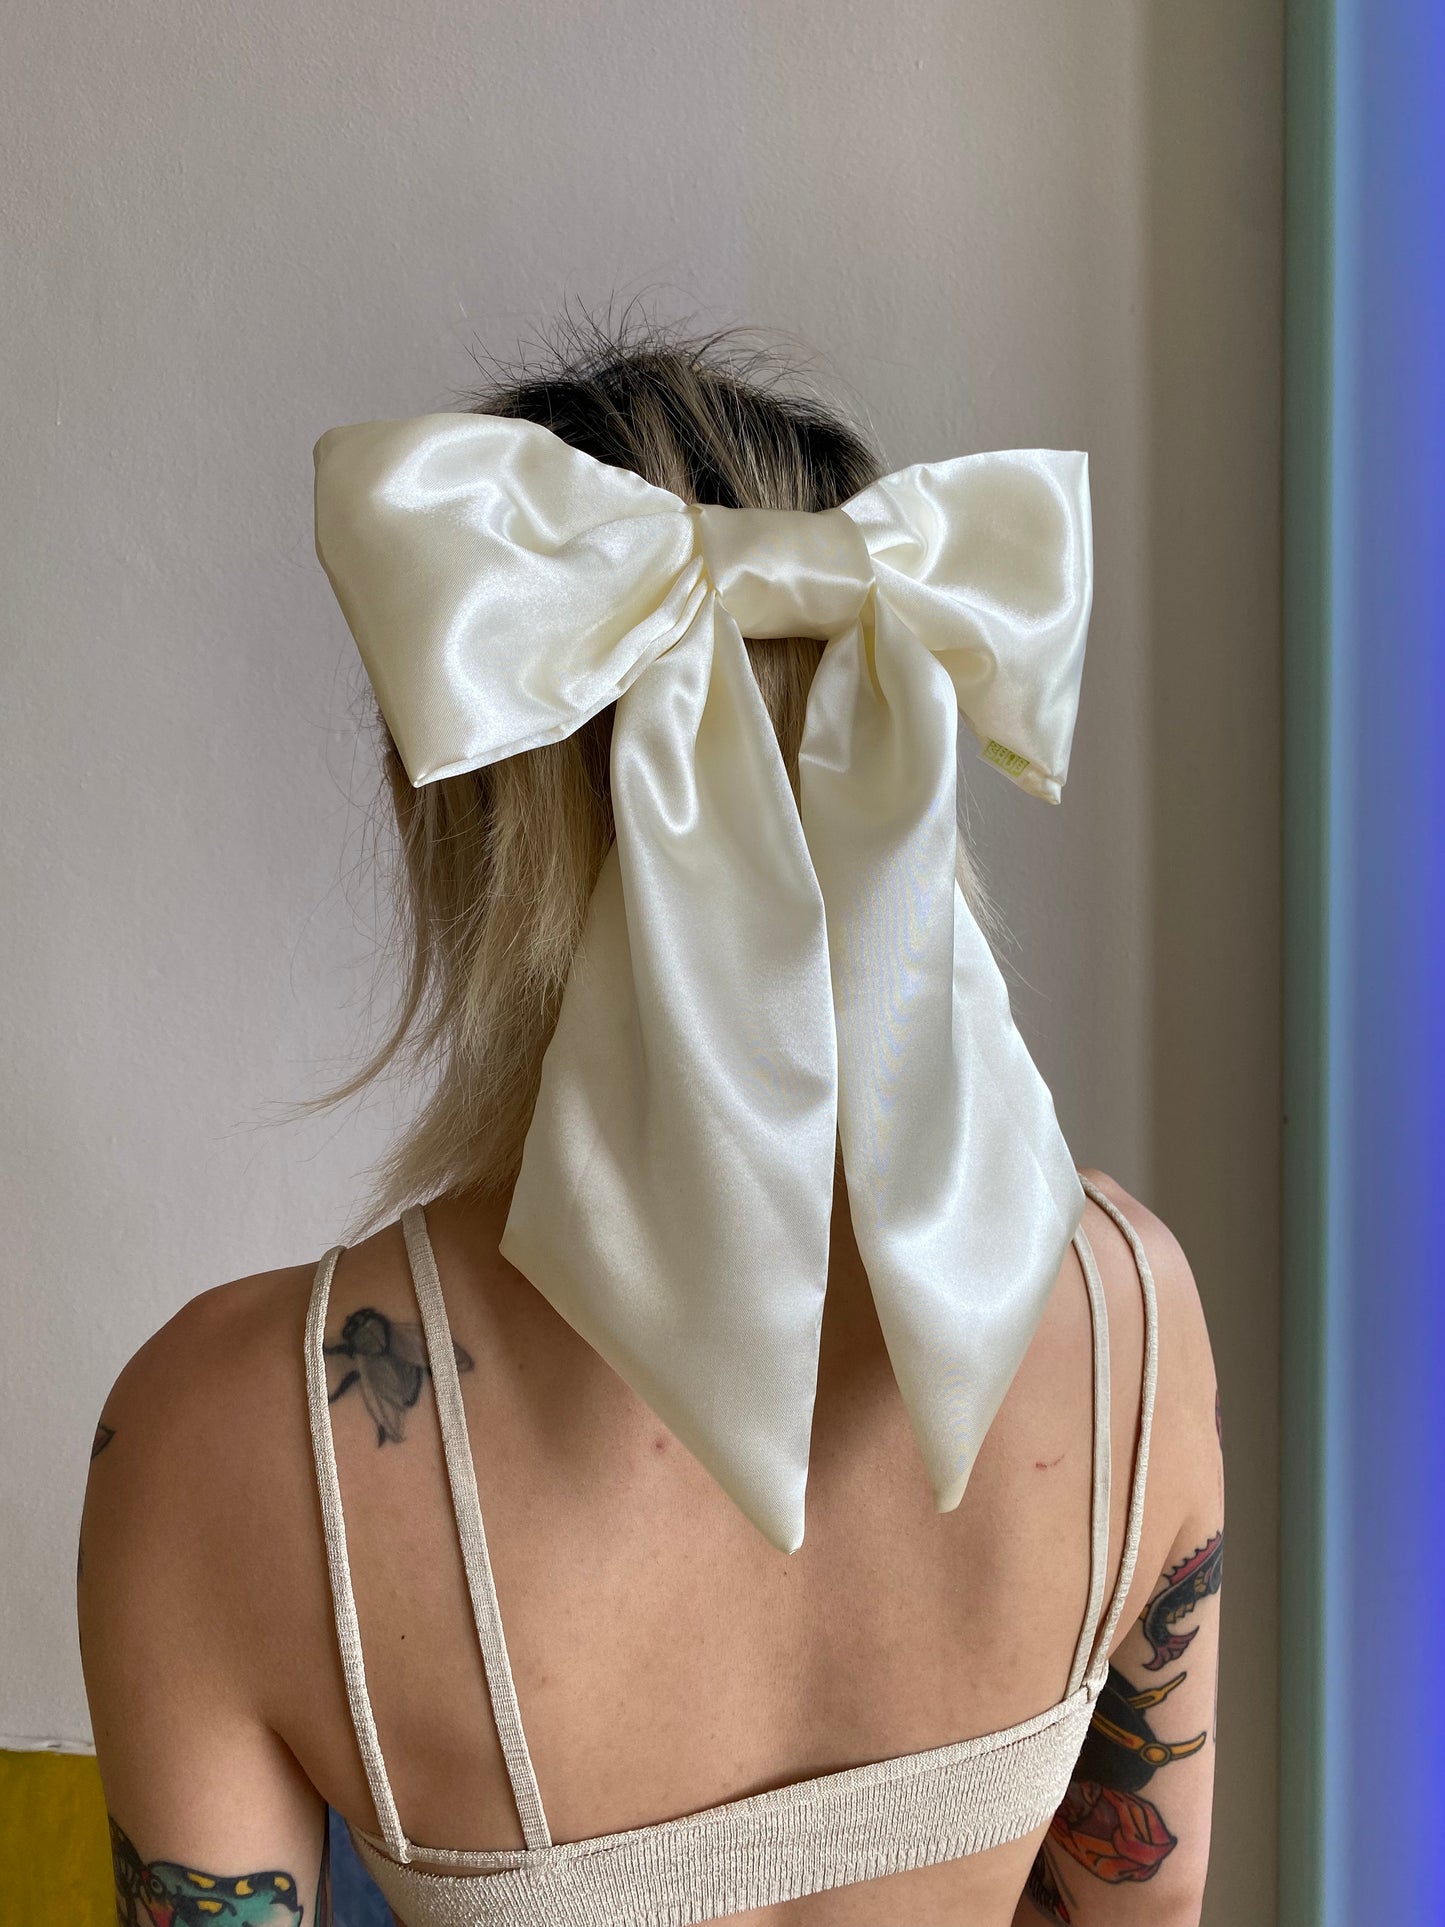 Giant Bow Clip - color options